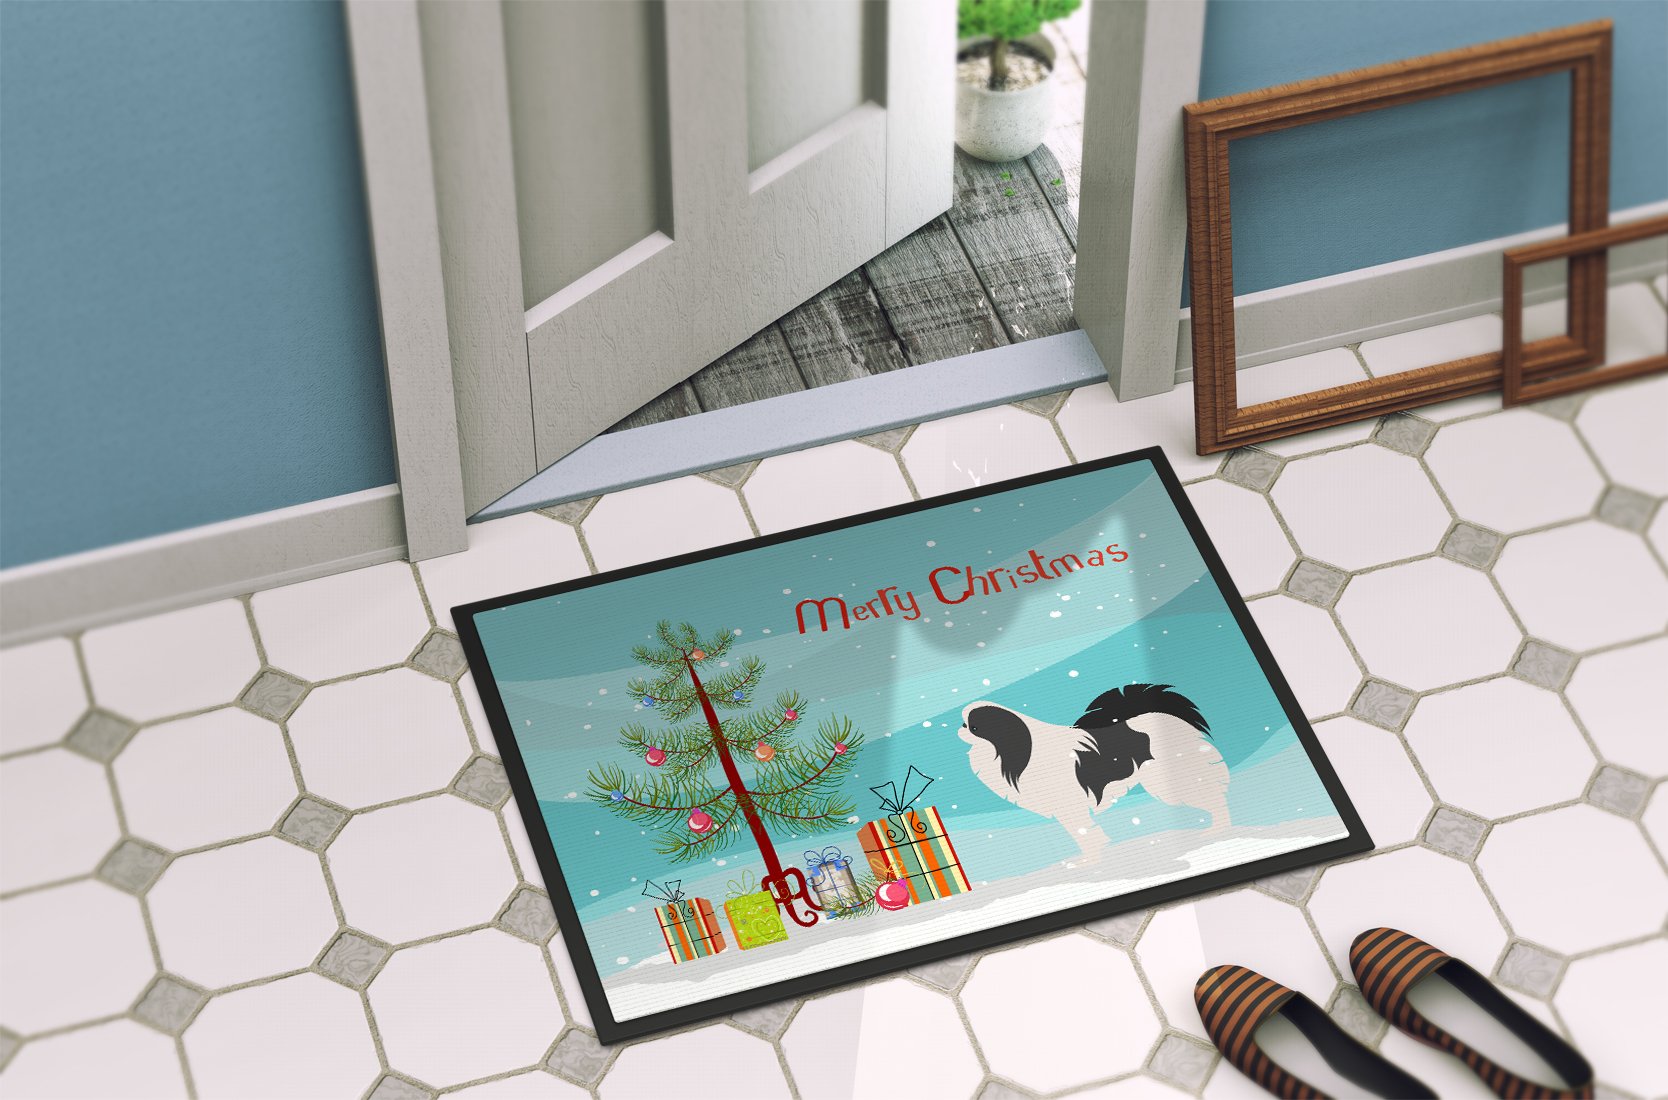 Japanese Chin Merry Christmas Tree Indoor or Outdoor Mat 24x36 BB2955JMAT by Caroline's Treasures